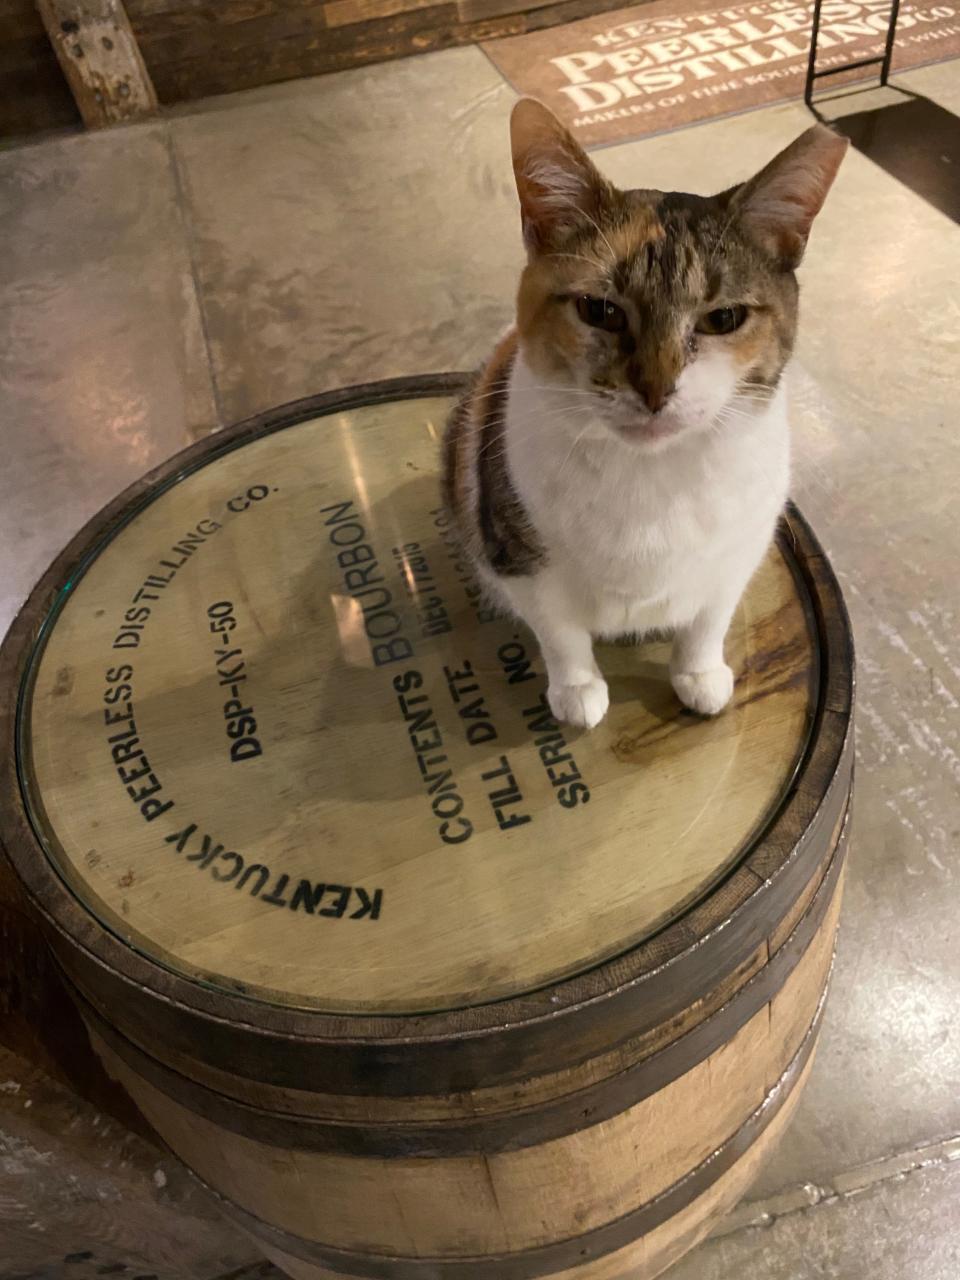 Rye Meow lives at Kentucky Peerless Distilling Co.